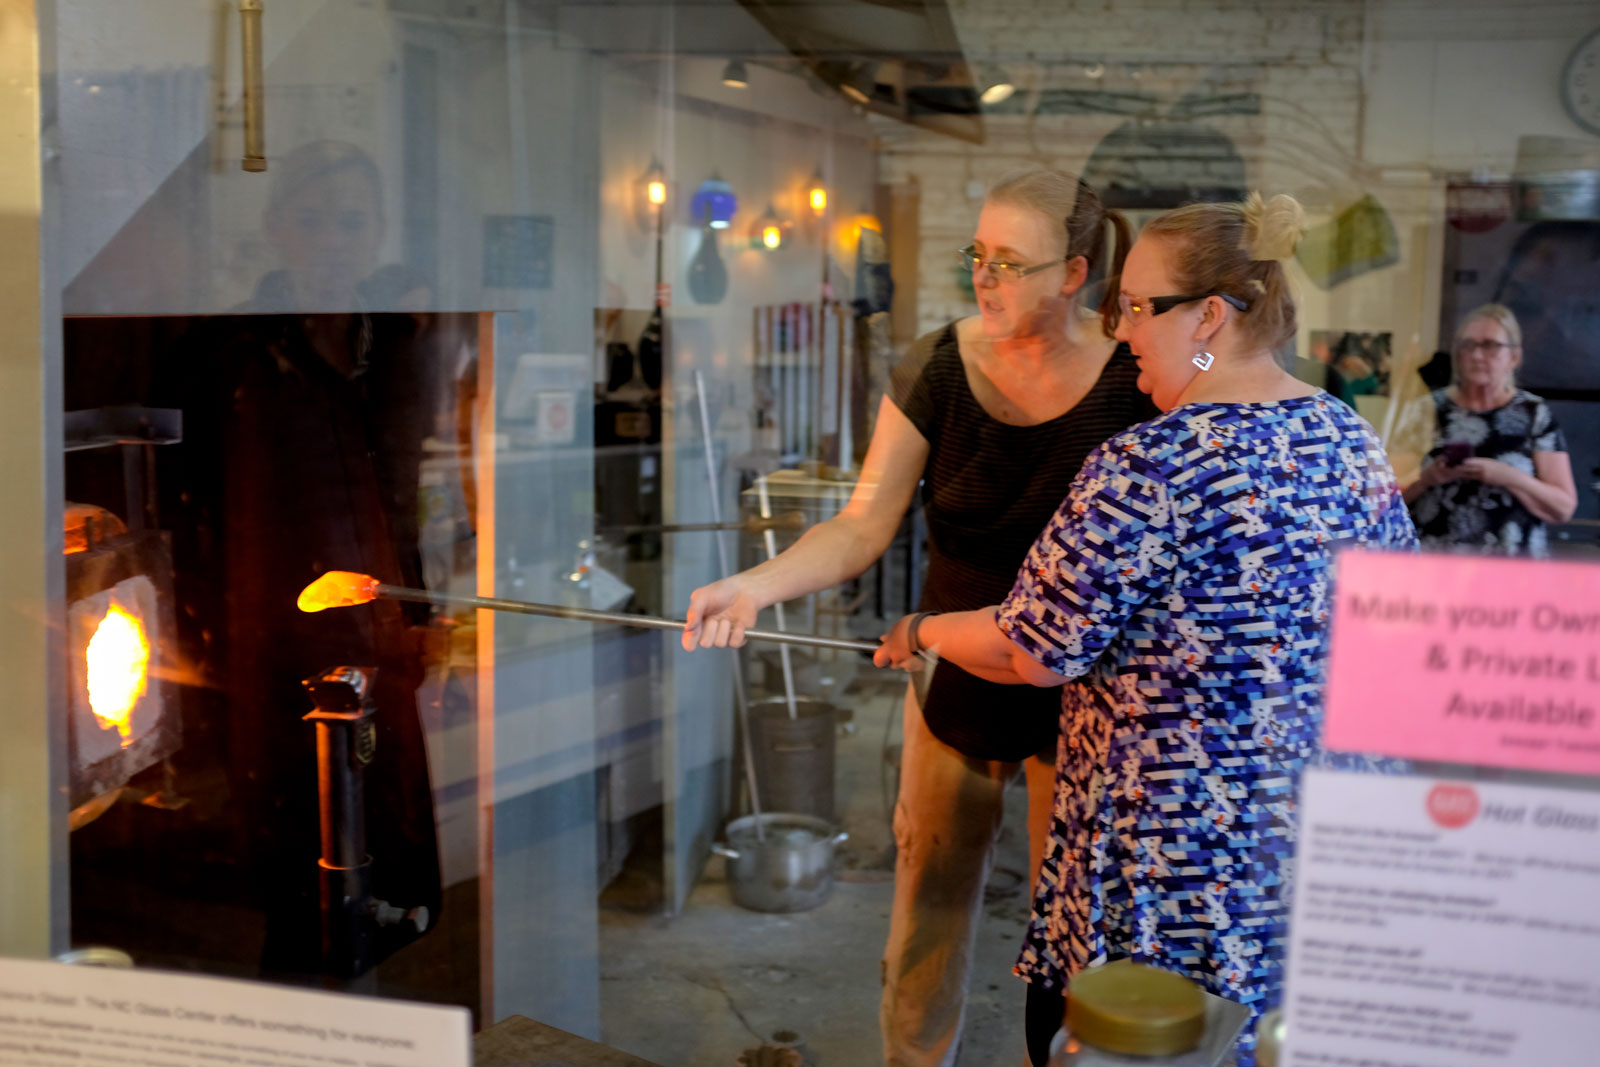 A glass blowing demonstration at River Arts District in Asheville